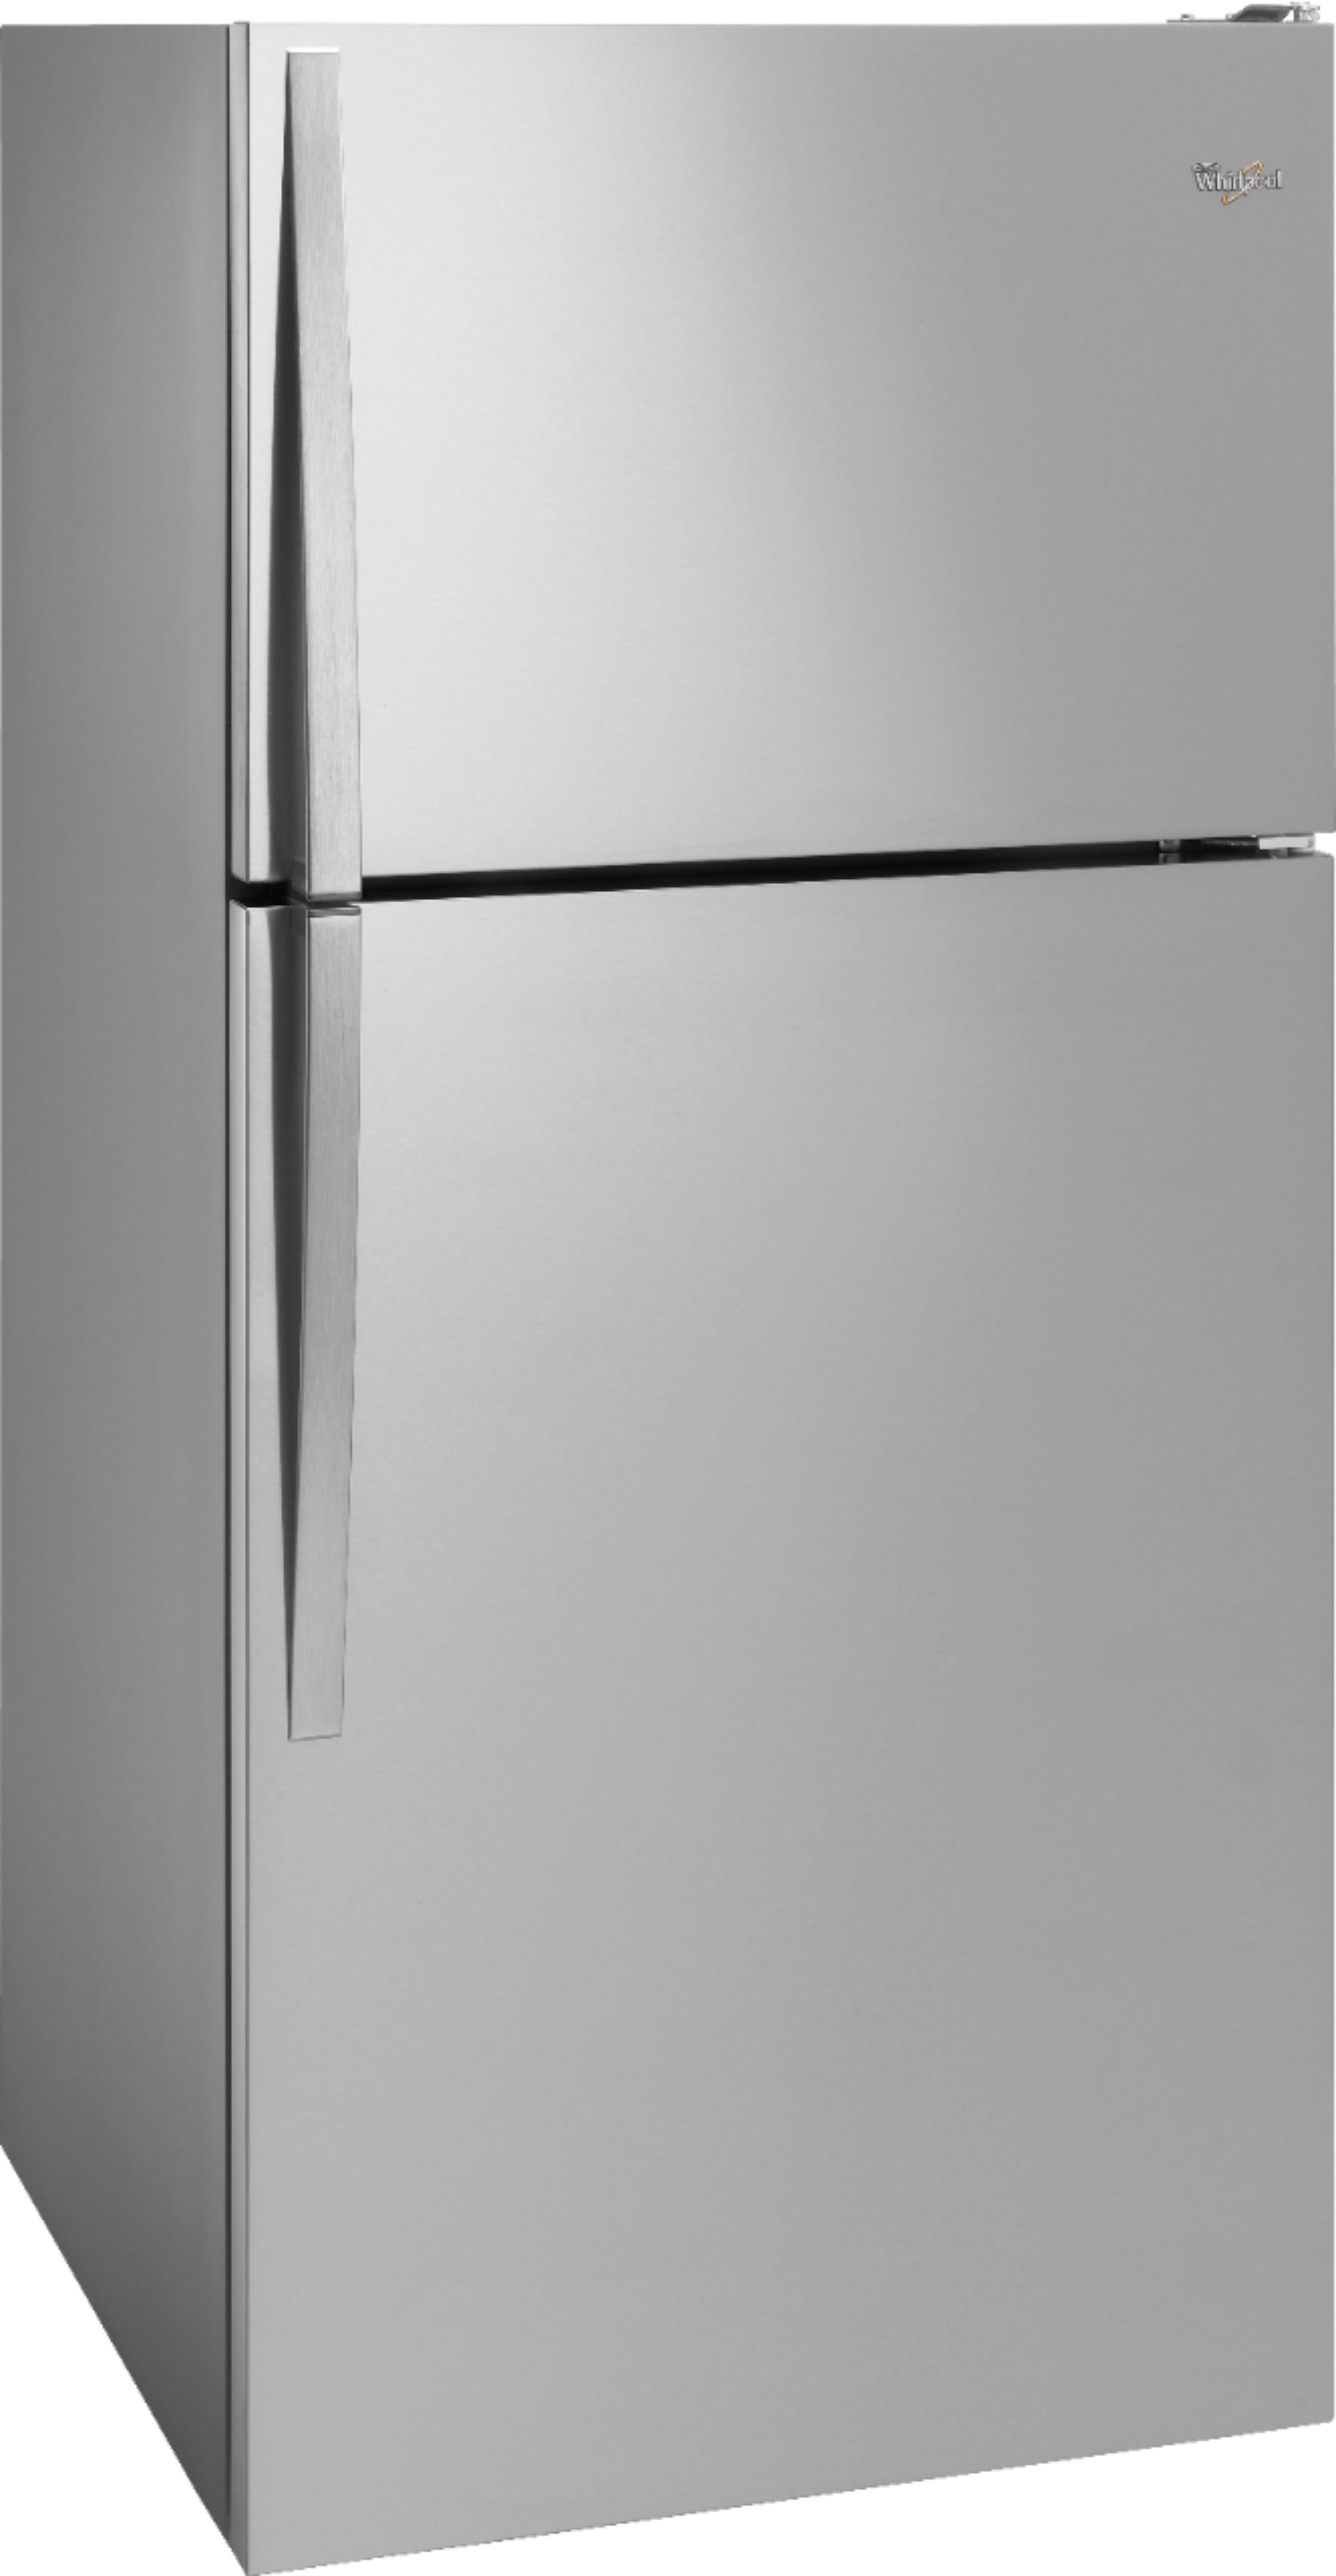 Angle View: Whirlpool - 18.2 Cu. Ft. Top-Freezer Refrigerator - Monochromatic Stainless-Steel